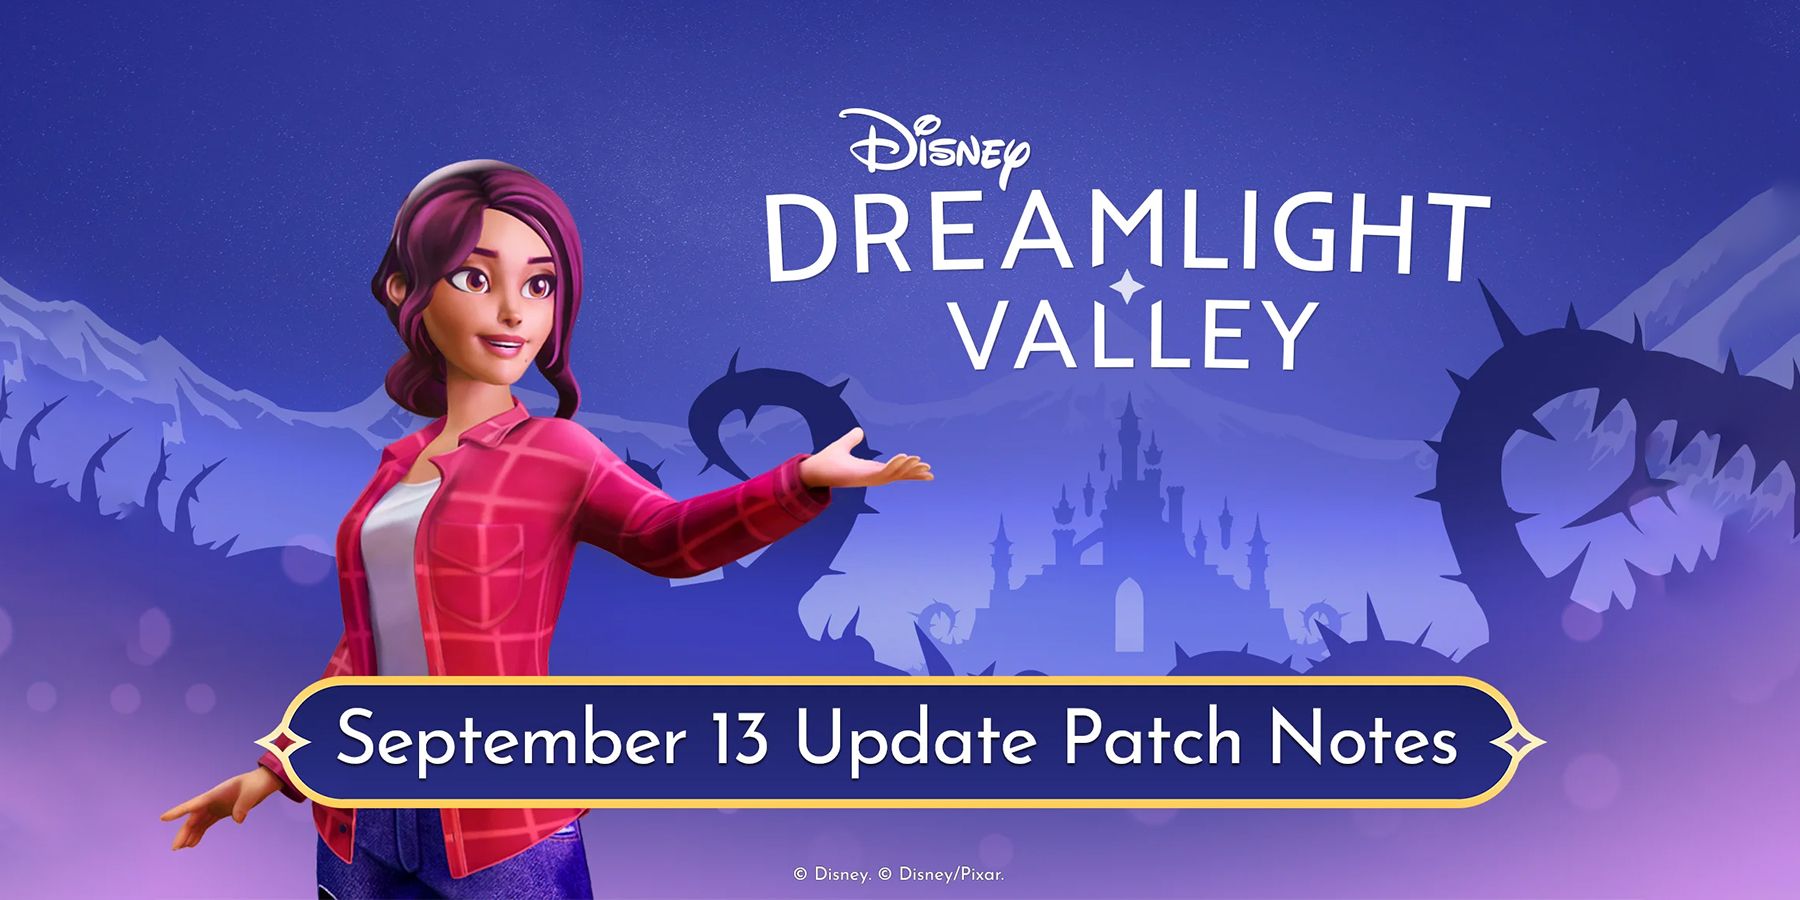 Disney Dreamlight Valley Reveals Patch Notes for Big Enchanted